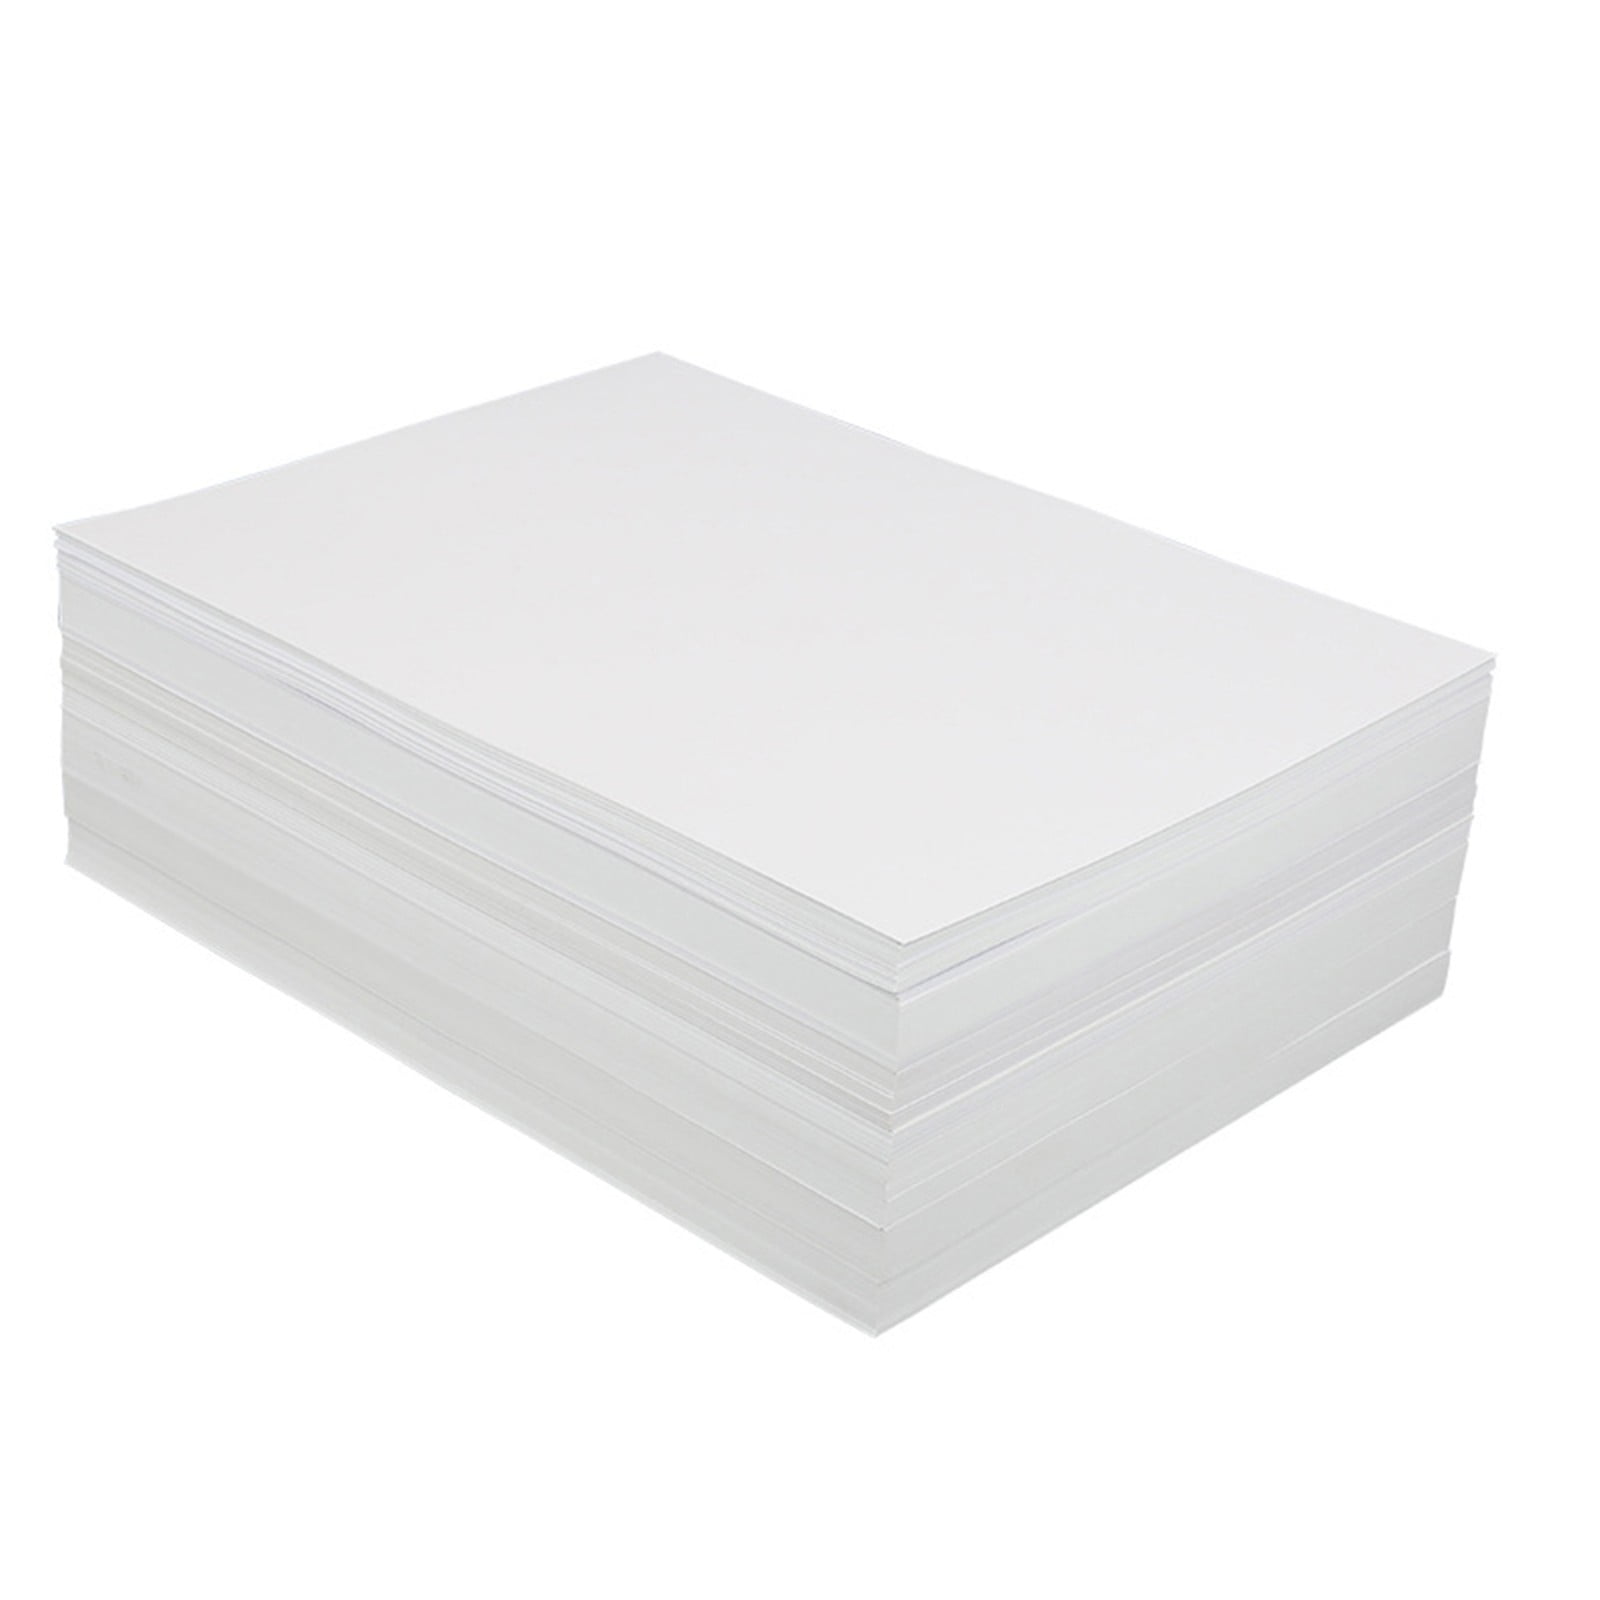 180gsm 9.9mil x 50 Sheets PPD133-50 PPD Inkjet Glossy Photo Paper Legal 8.5x14 49lb 